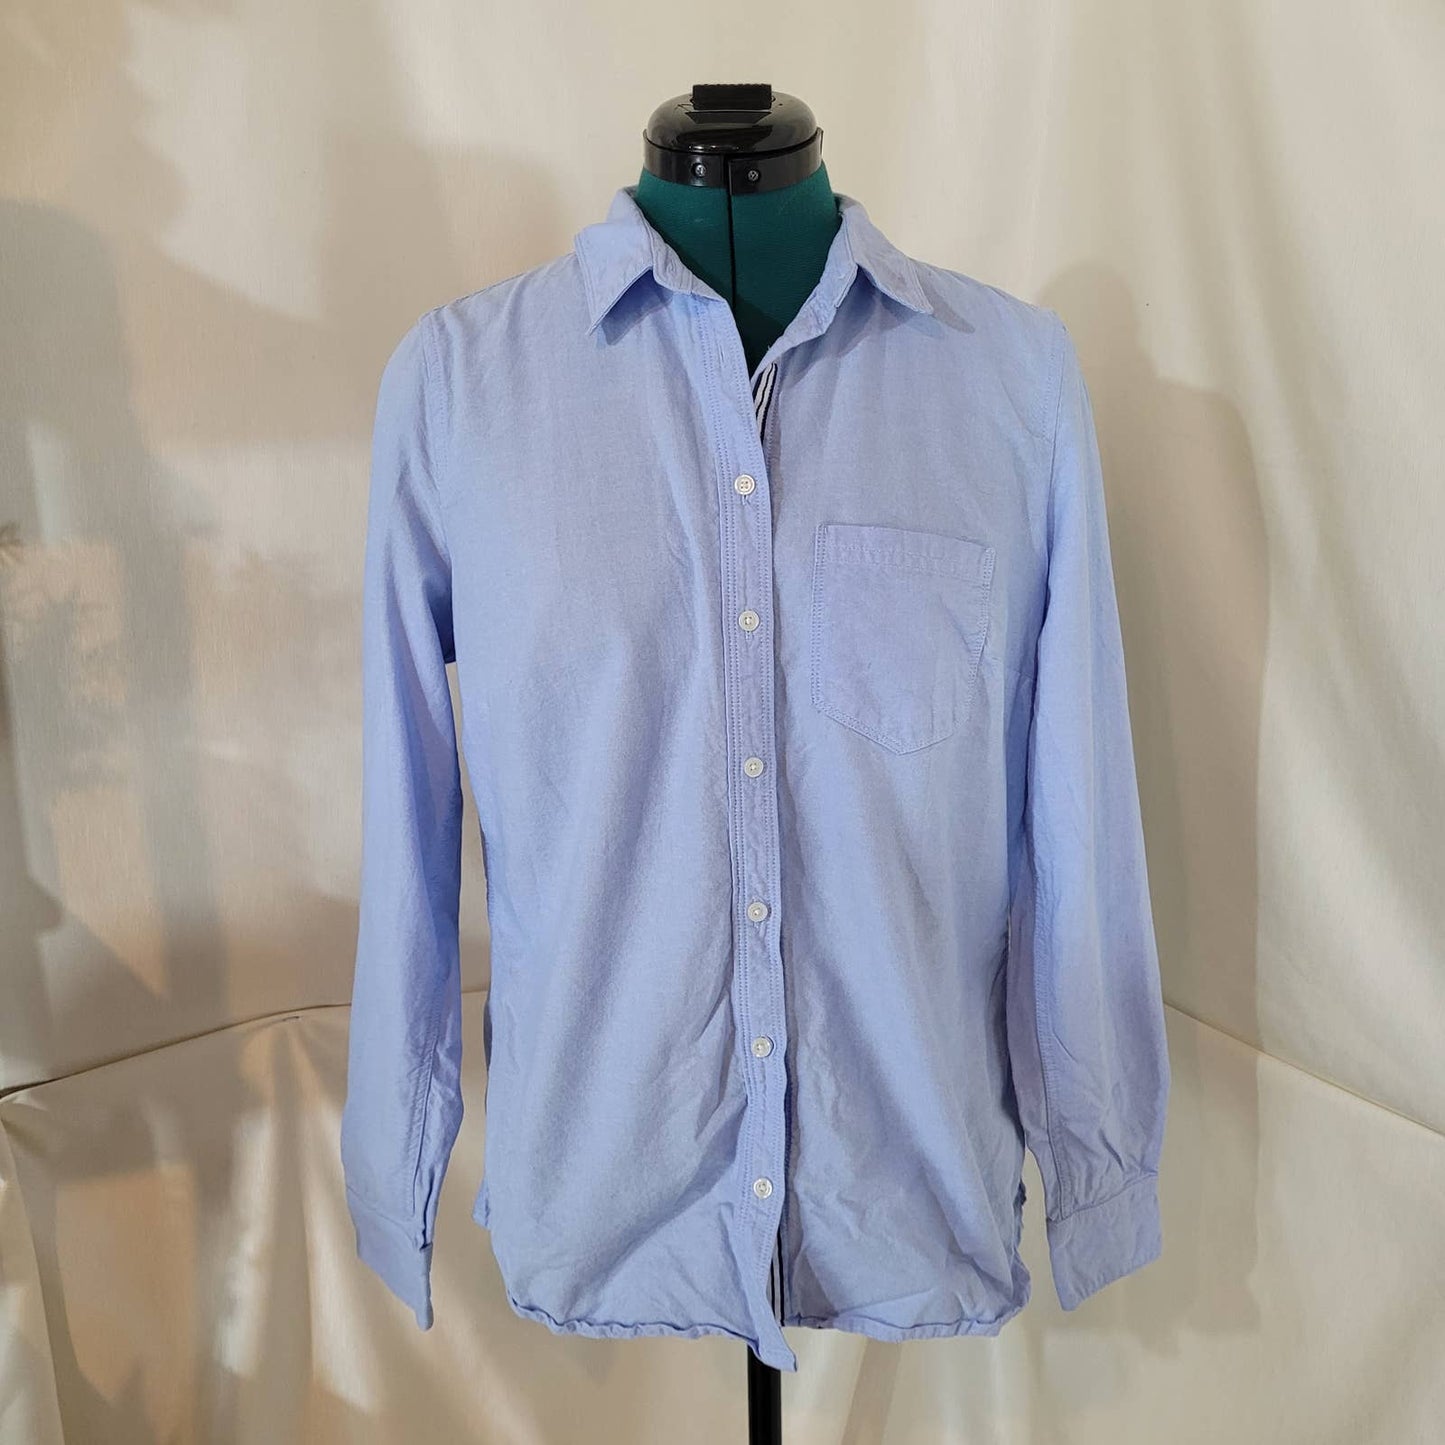 Banana Republic Soft Wash Blue Button Up Collared Blouse - Size Small